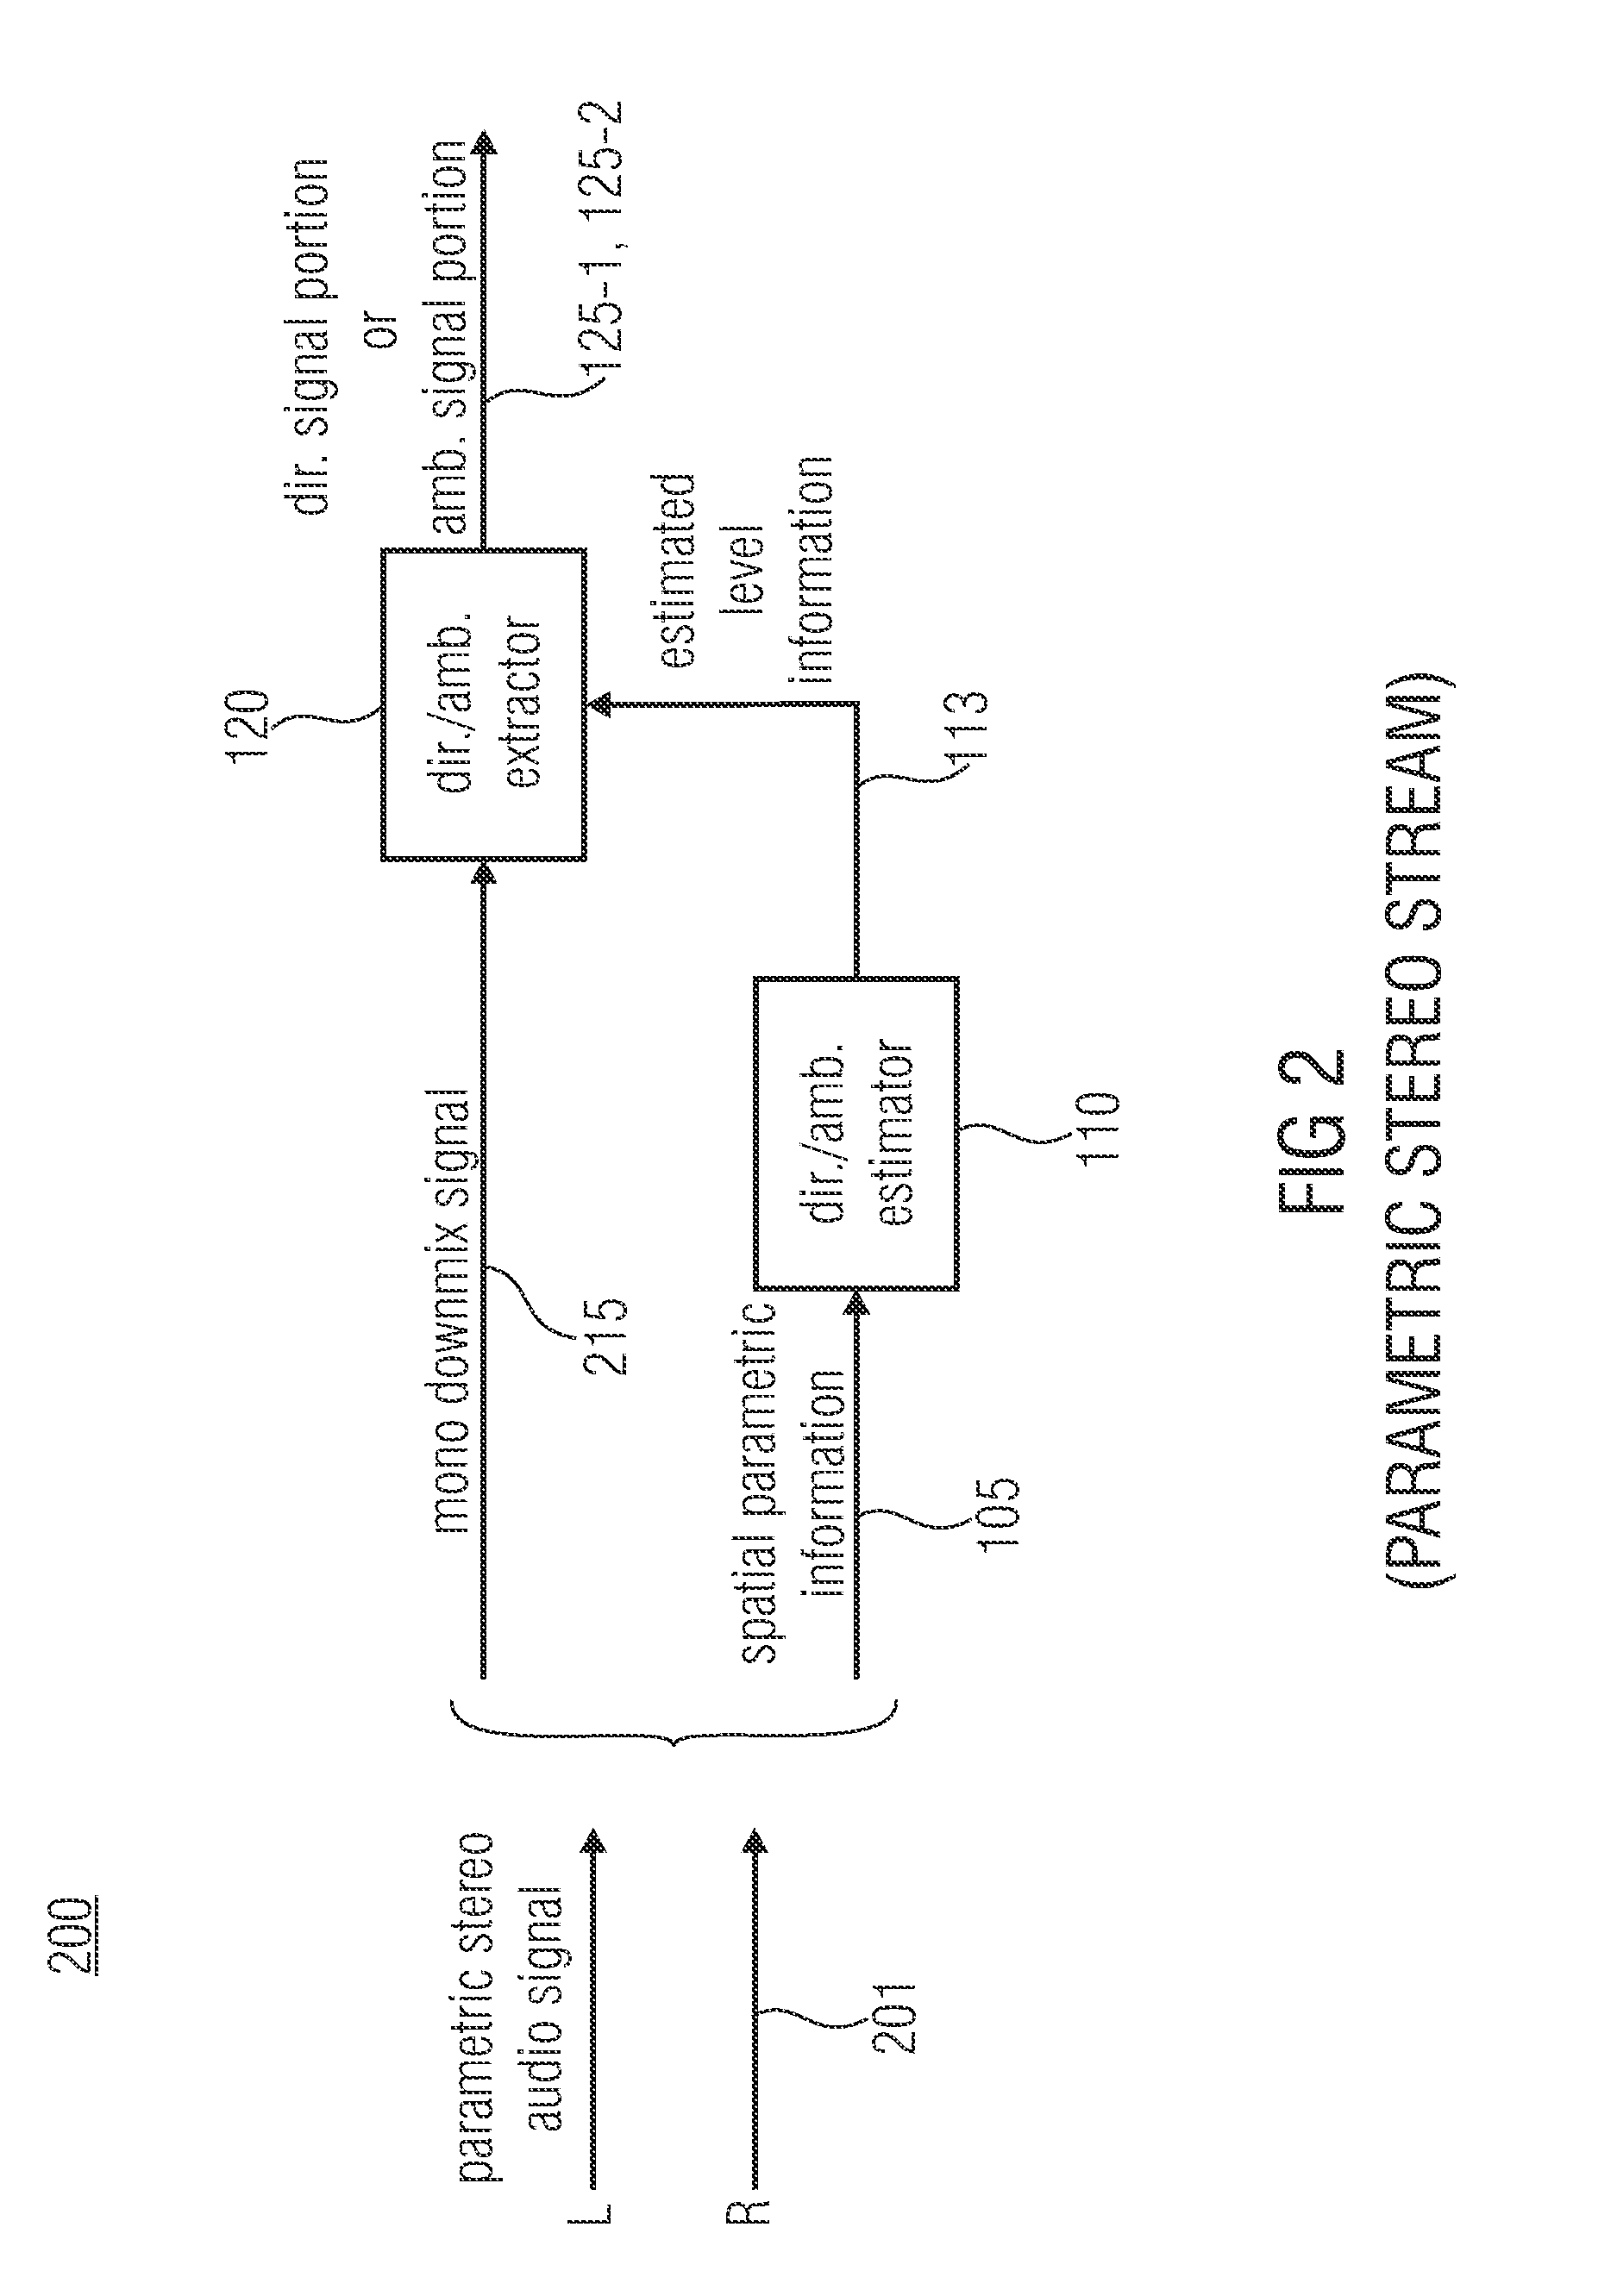 Apparatus and method for extracting a direct/ambience signal from a downmix signal and spatial parametric information